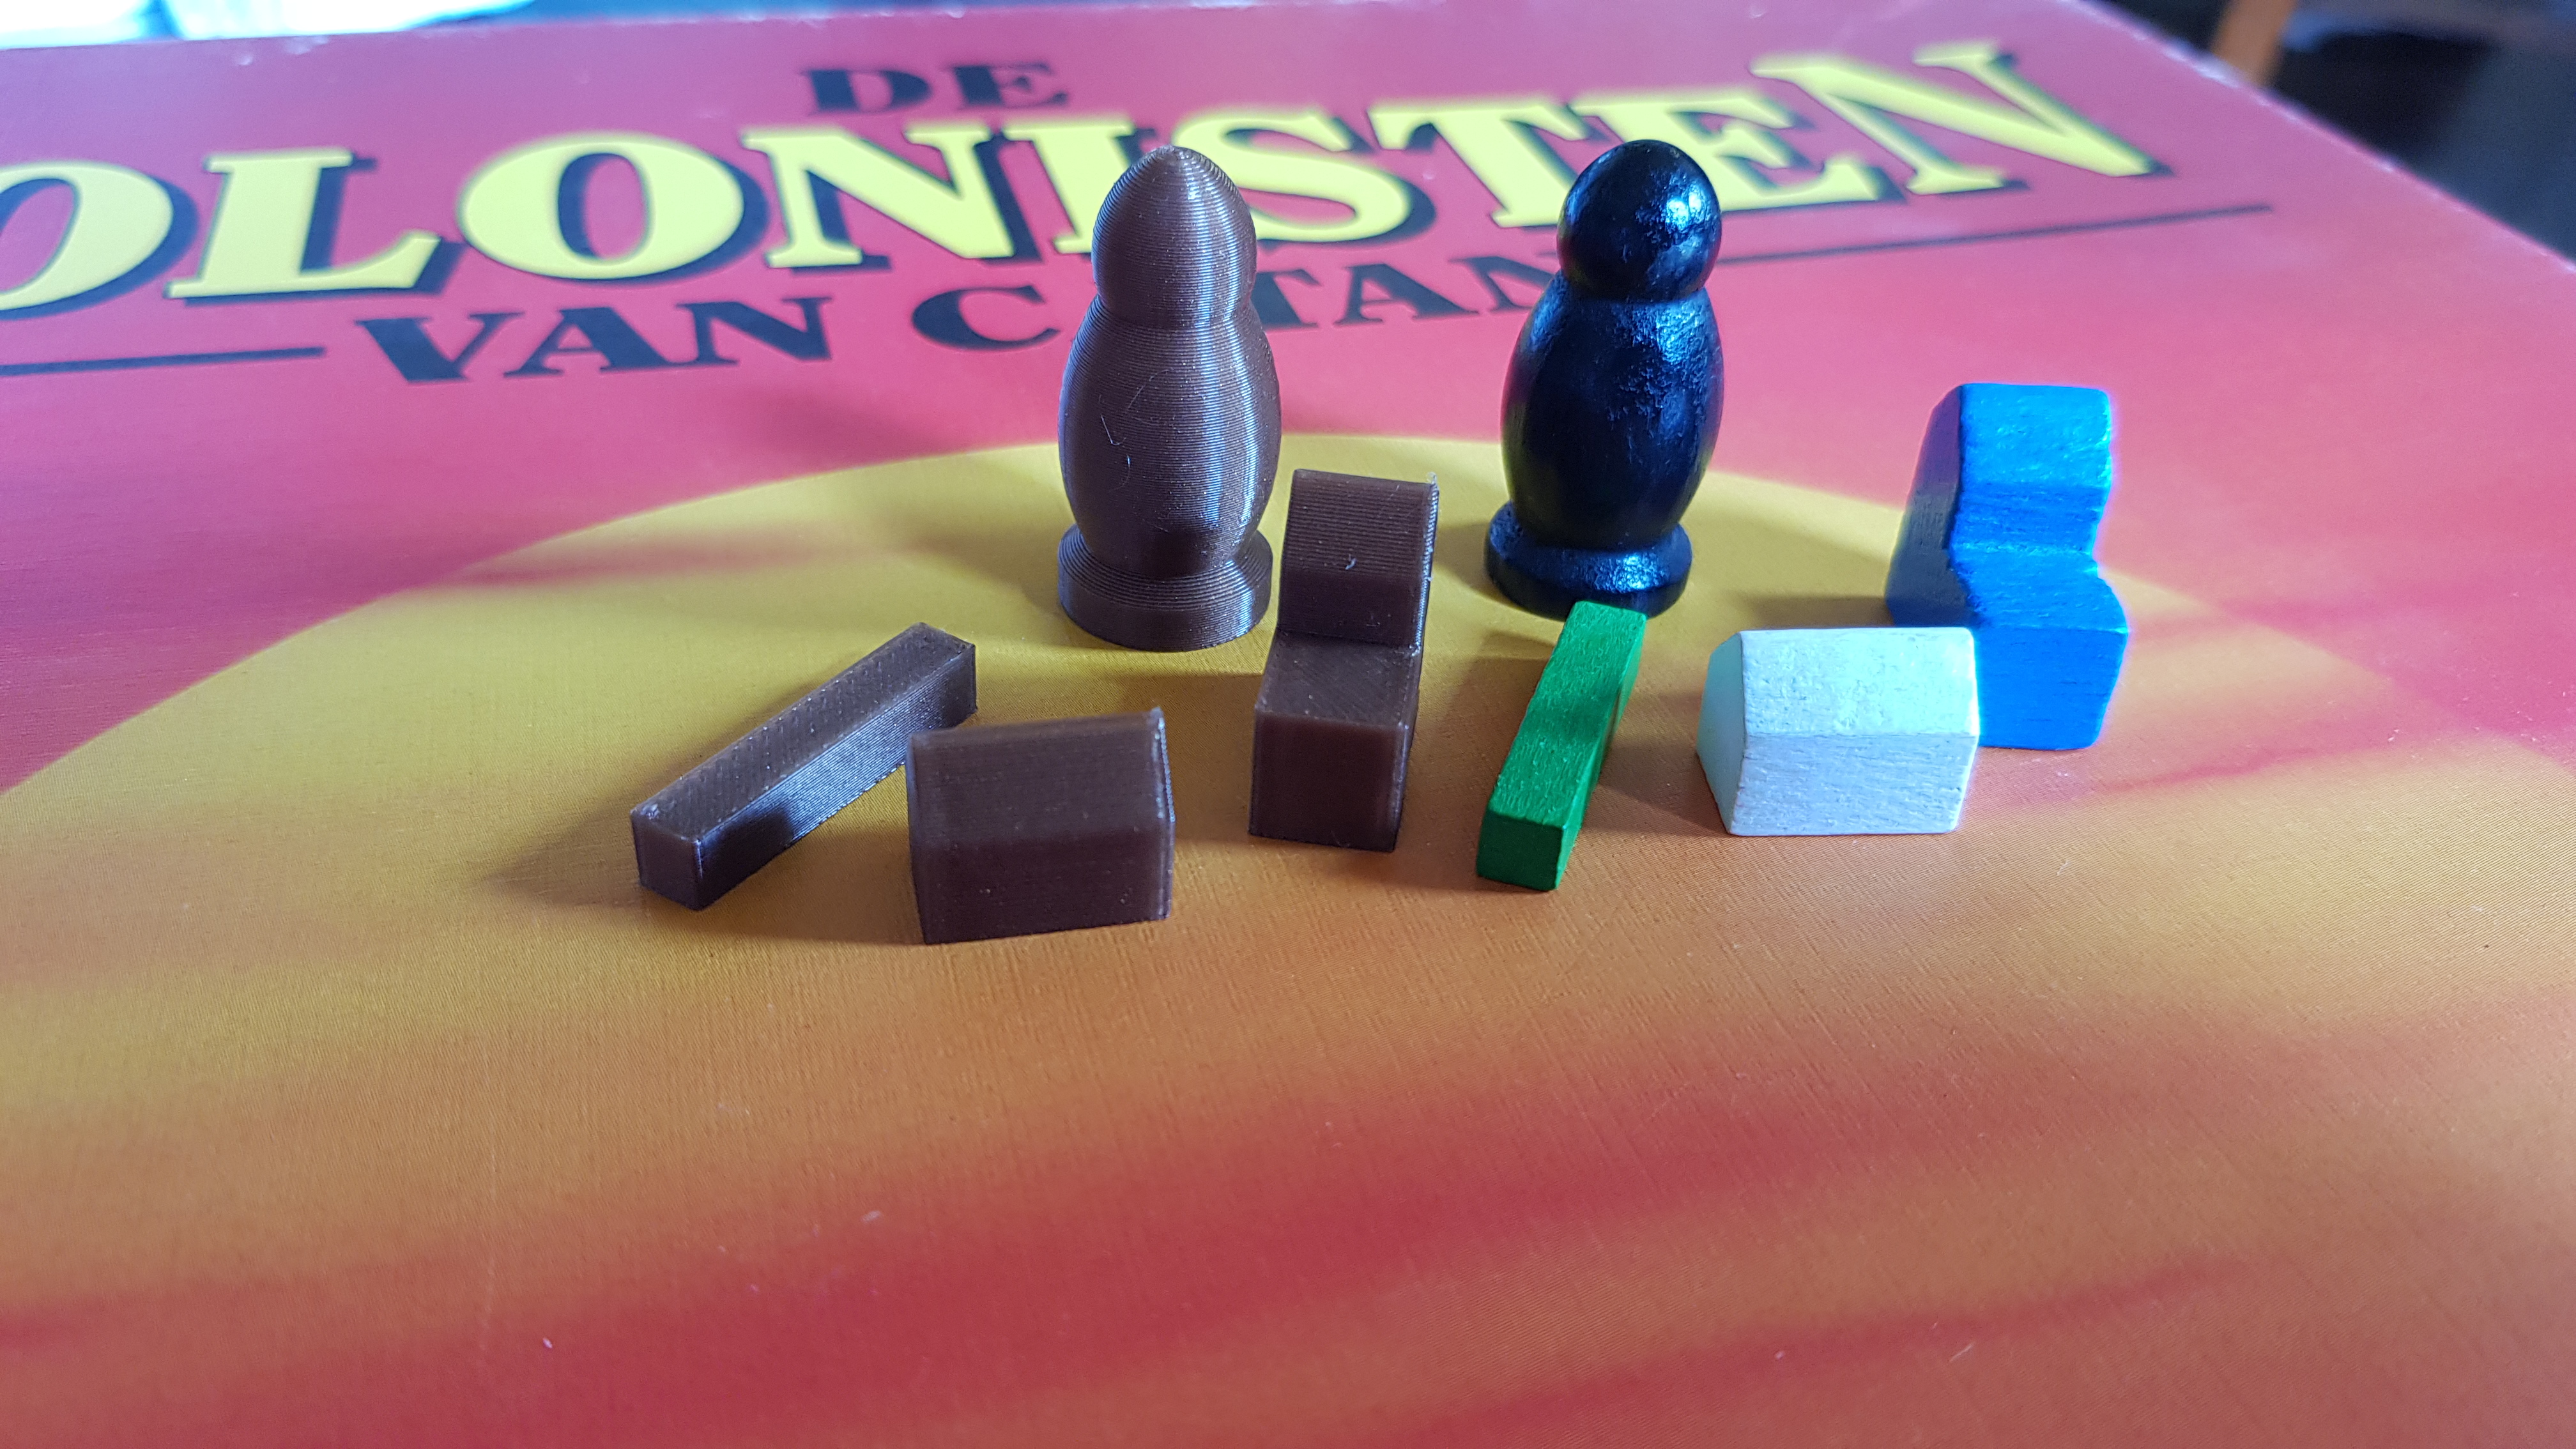 Settlers of Catan Replacement Parts (old style)